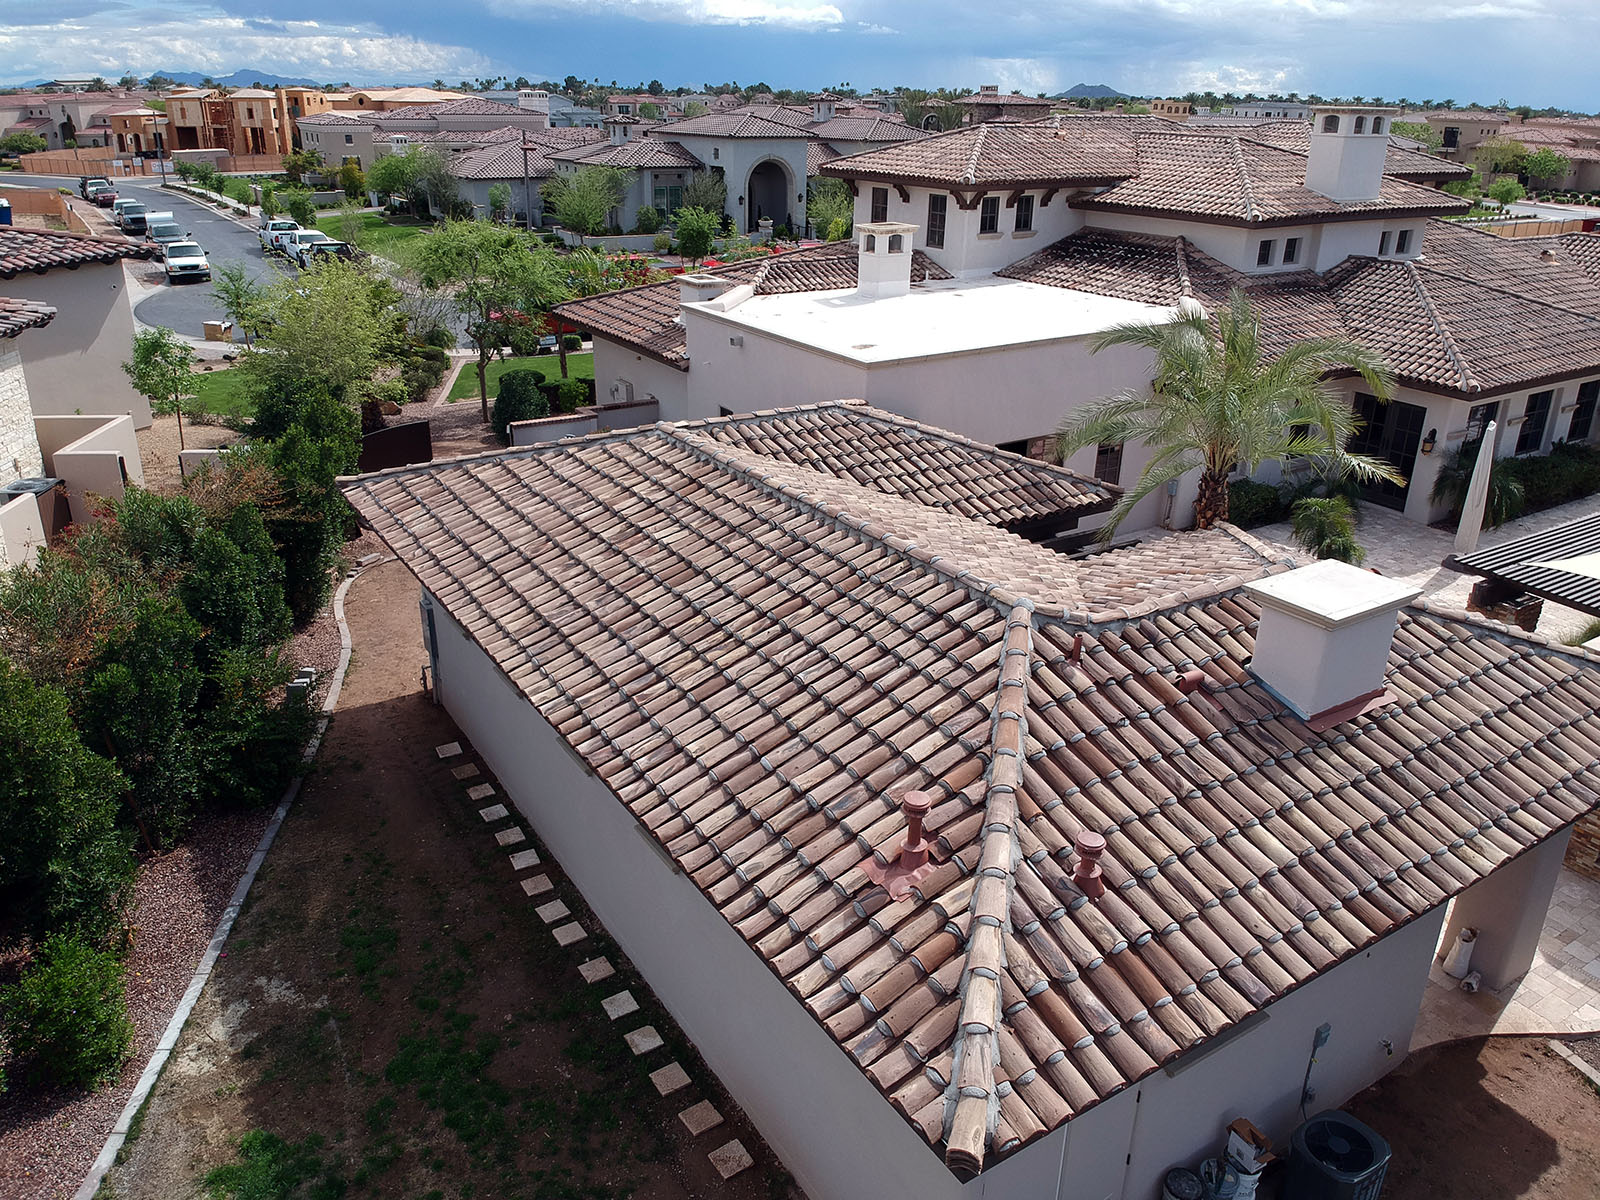 Phoenix-area home with tile roof